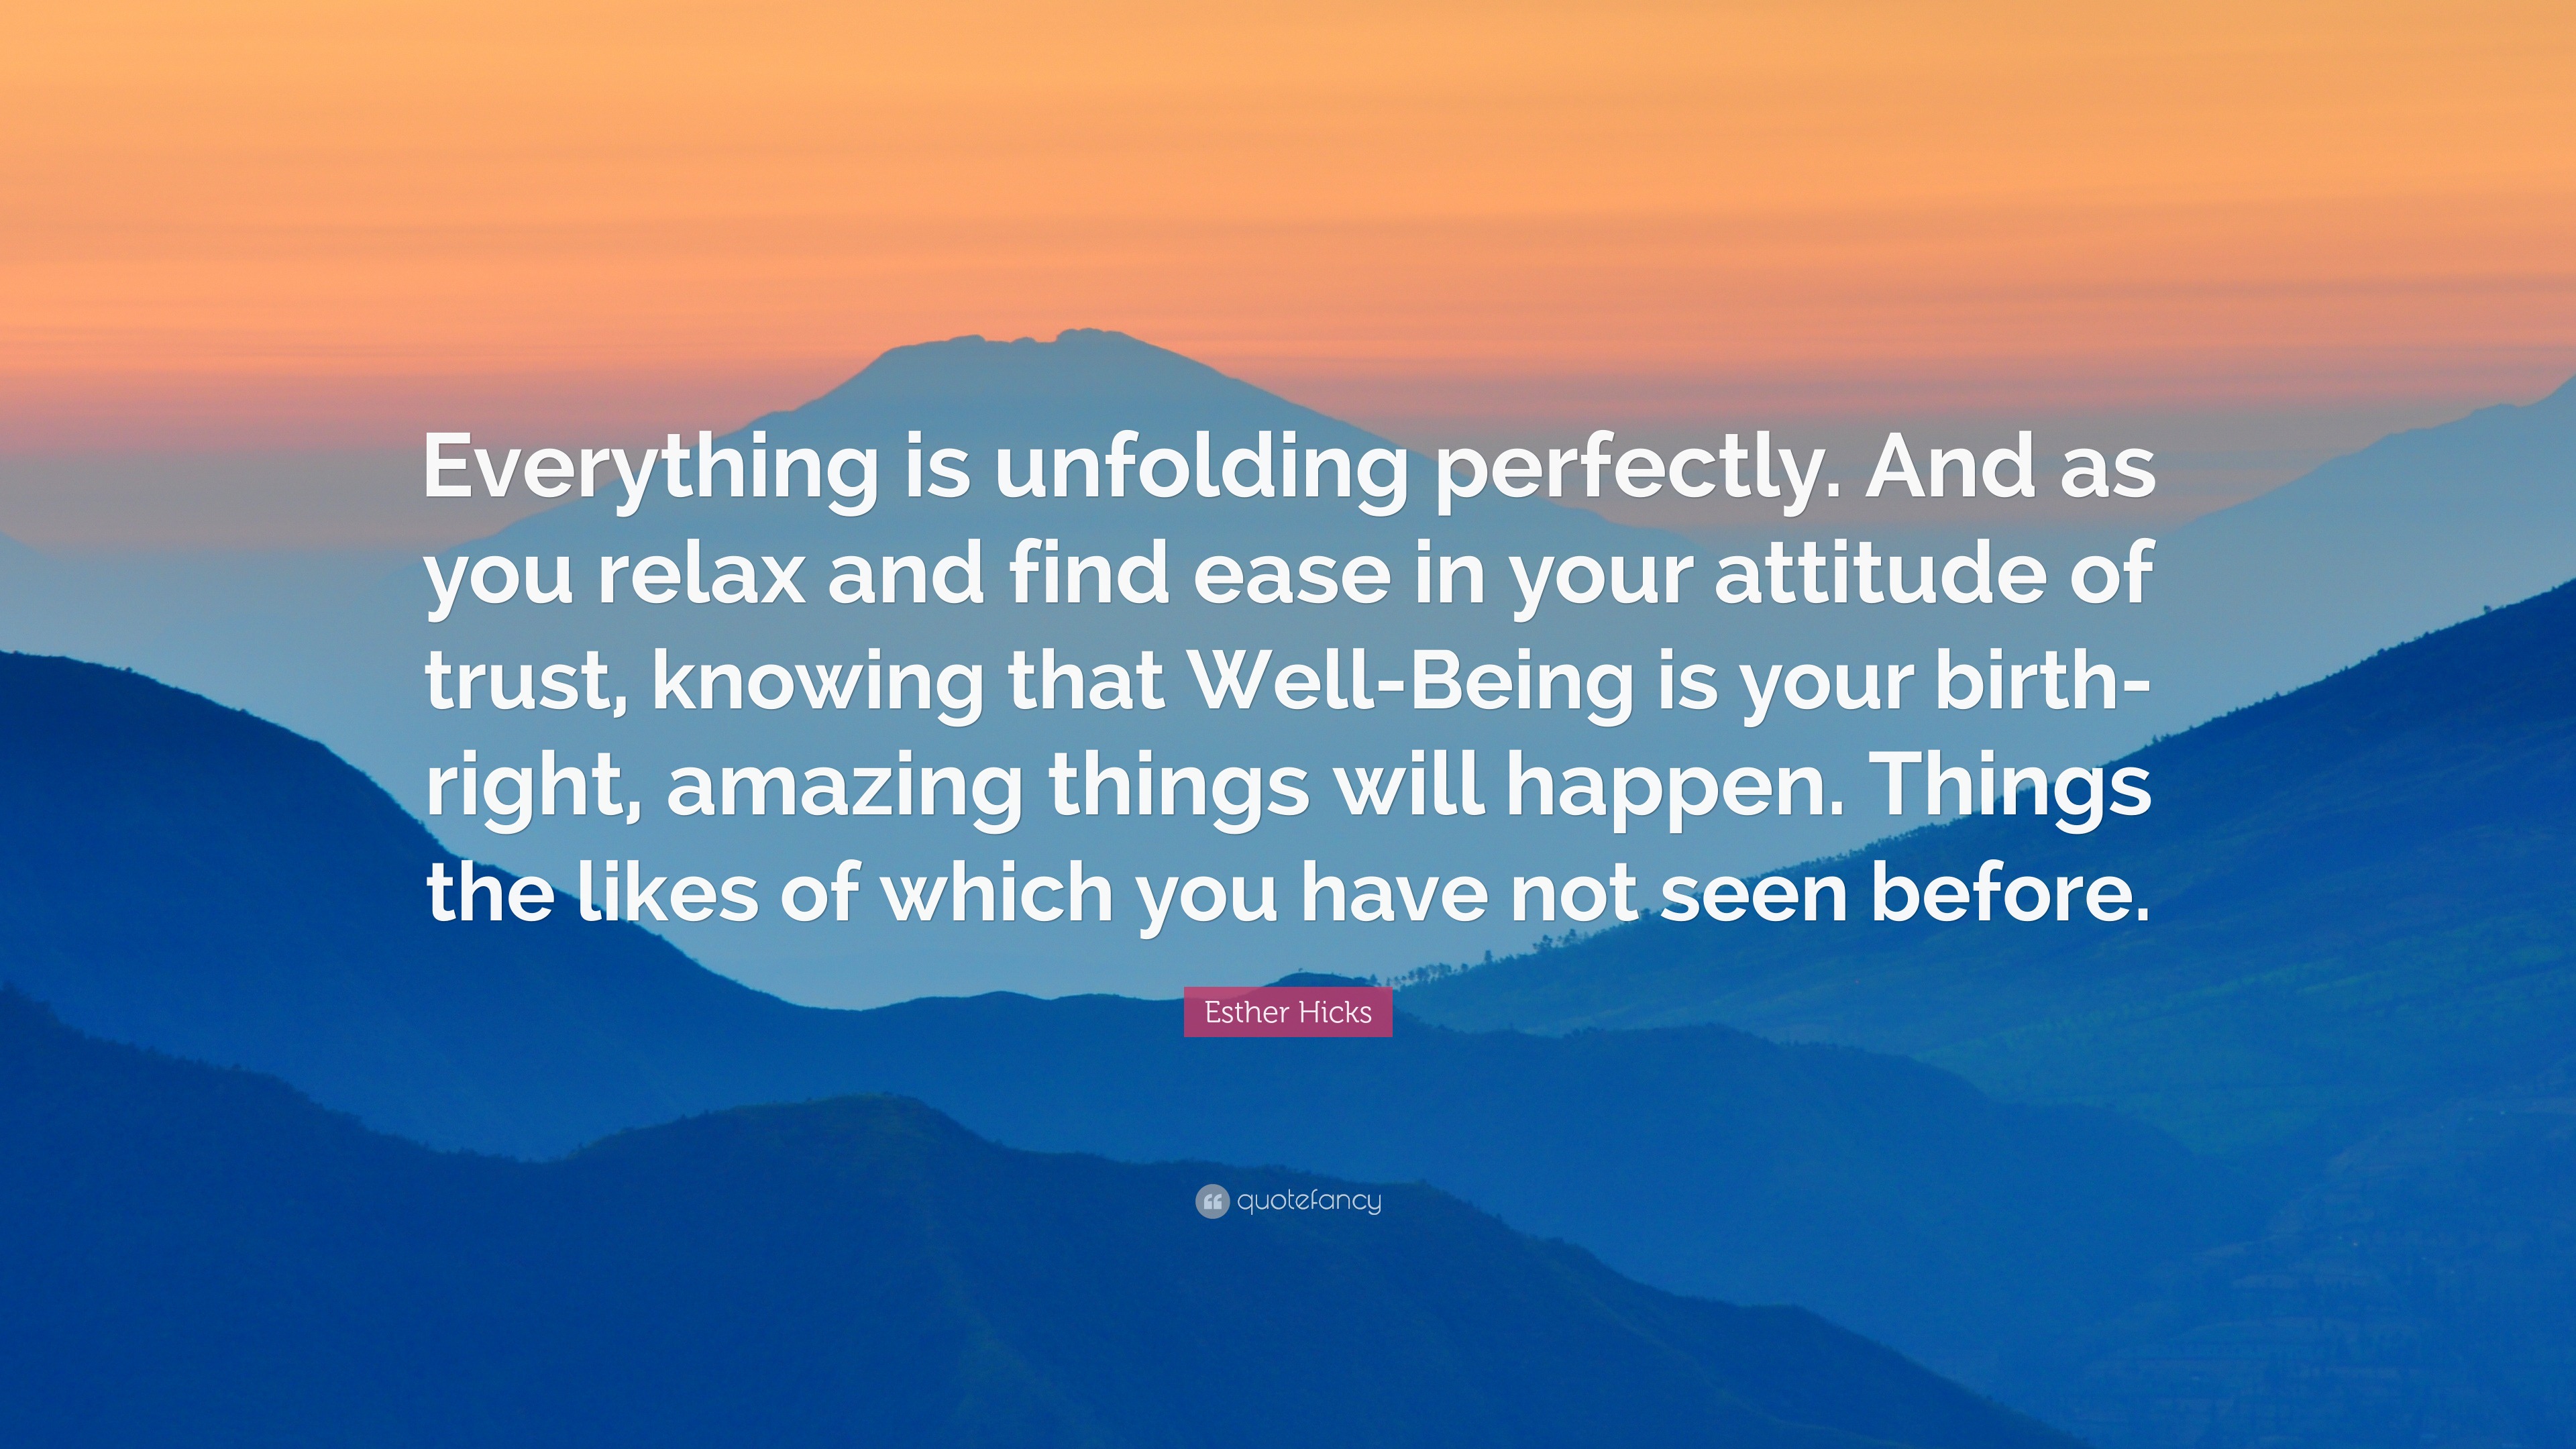 Esther Hicks Quote: “Everything is unfolding perfectly. And as you relax  and find ease in your attitude of trust, knowing that Well-Being is ”